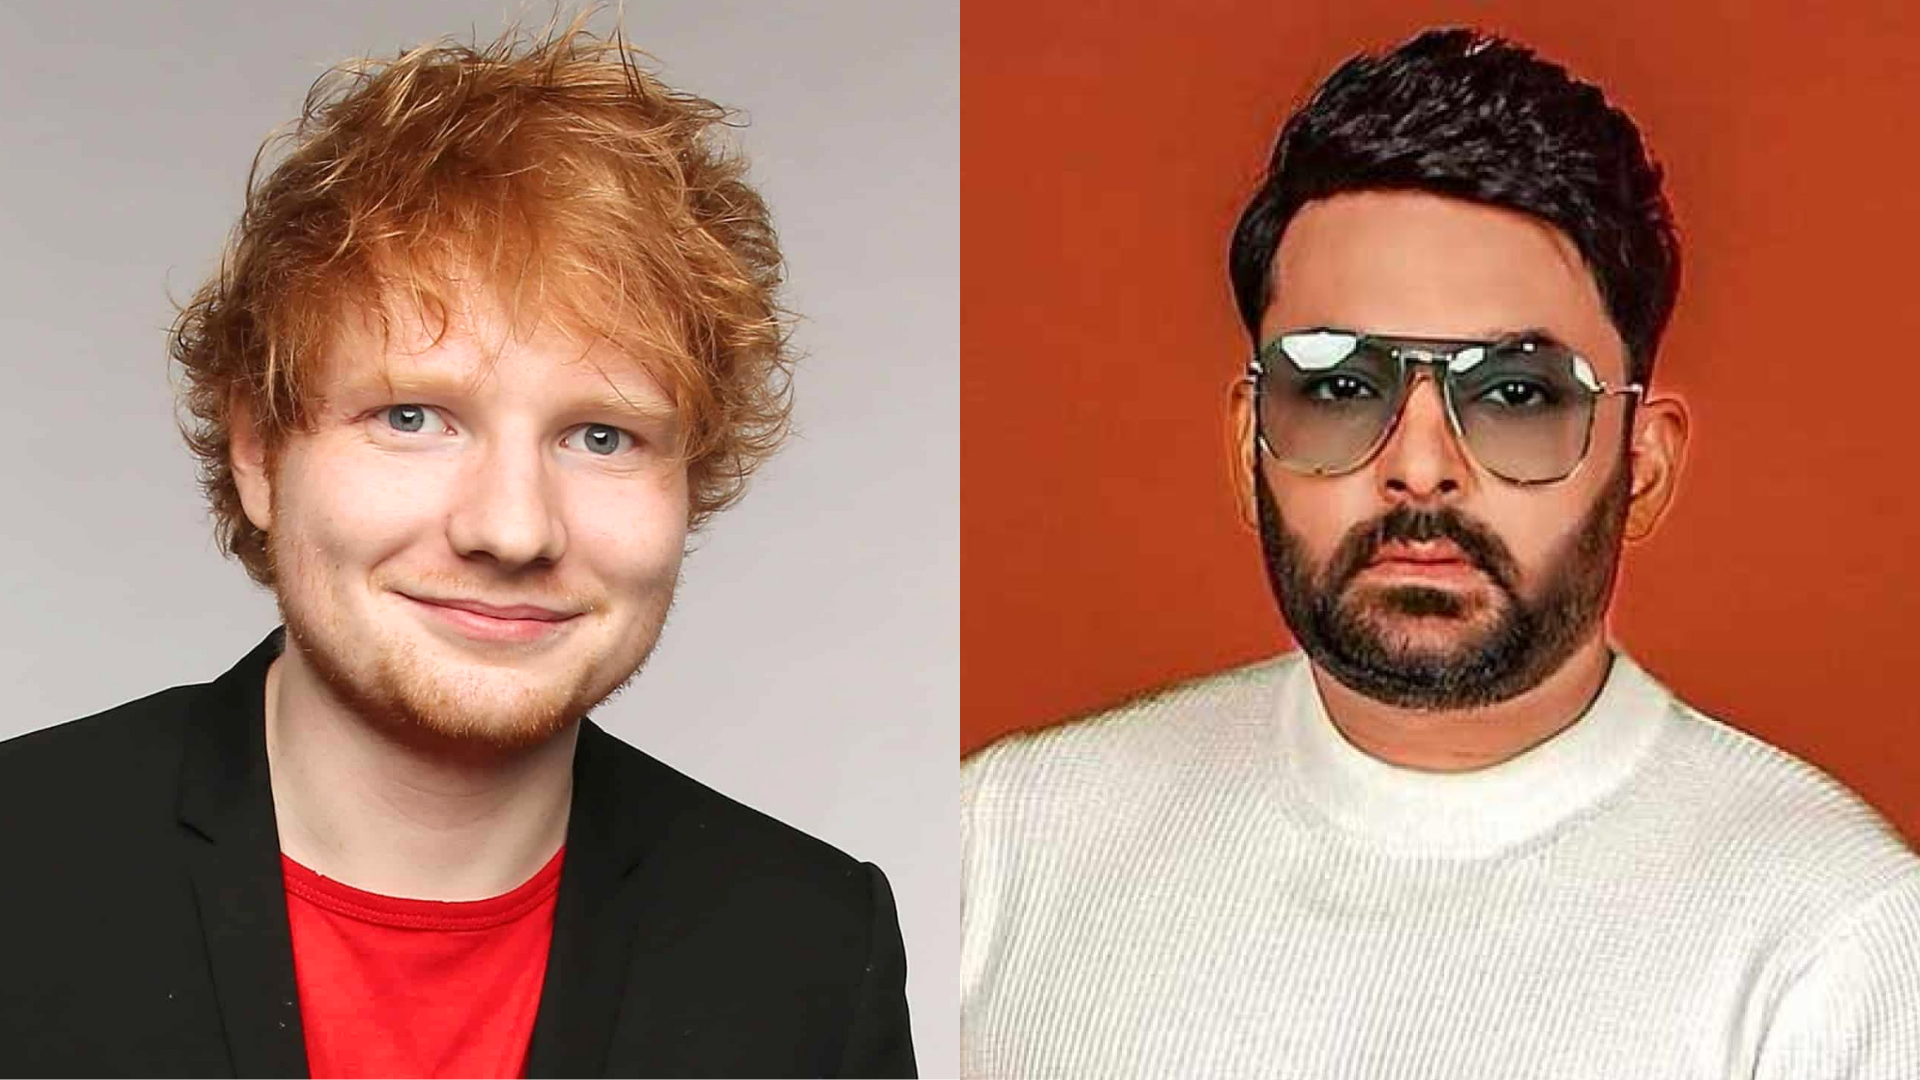 Is Ed Sheeran Going To Appear On Kapil Sharma’s New Netflix Show? Comedian Is All Set To Host A Lavish Party For The Singer